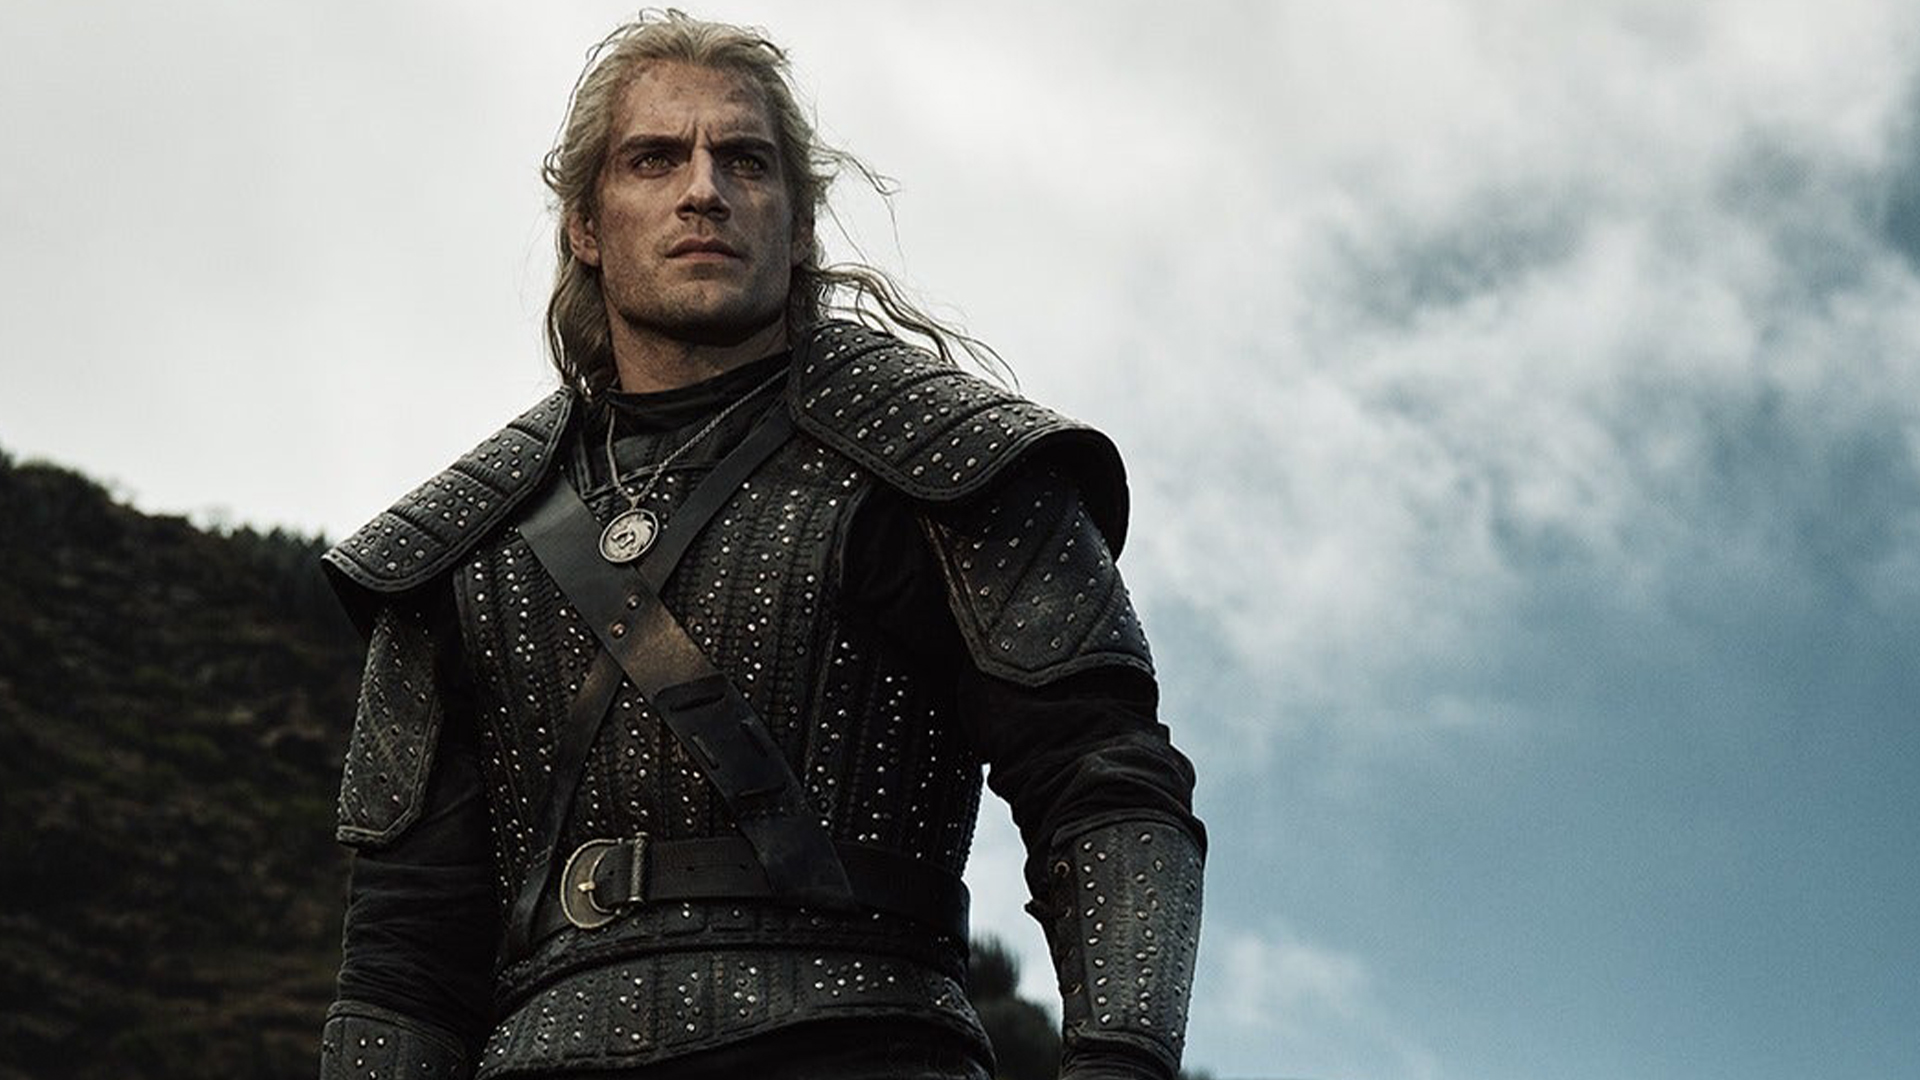 The Witcher 3’s next-gen upgrade will include free DLC from the Netflix series